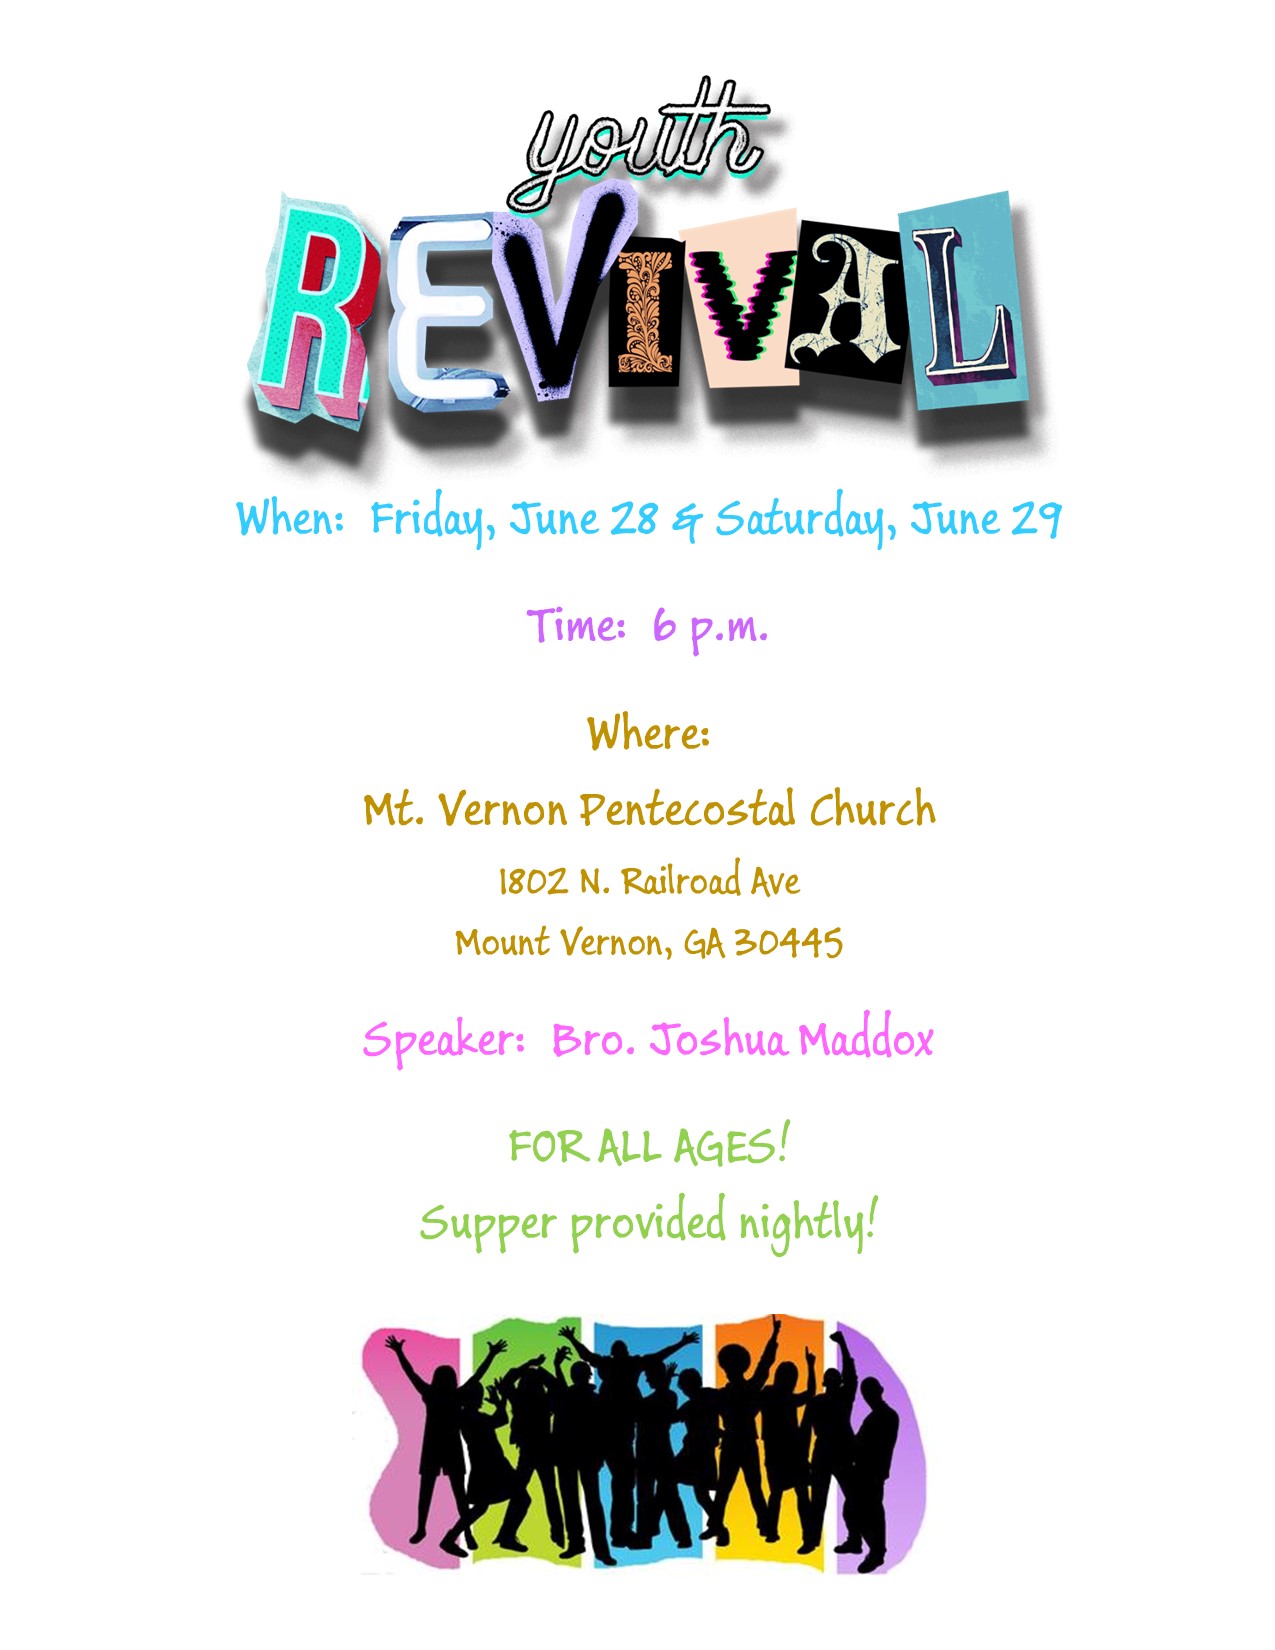 June 28-29--Youth Revival in Mt. Vernon